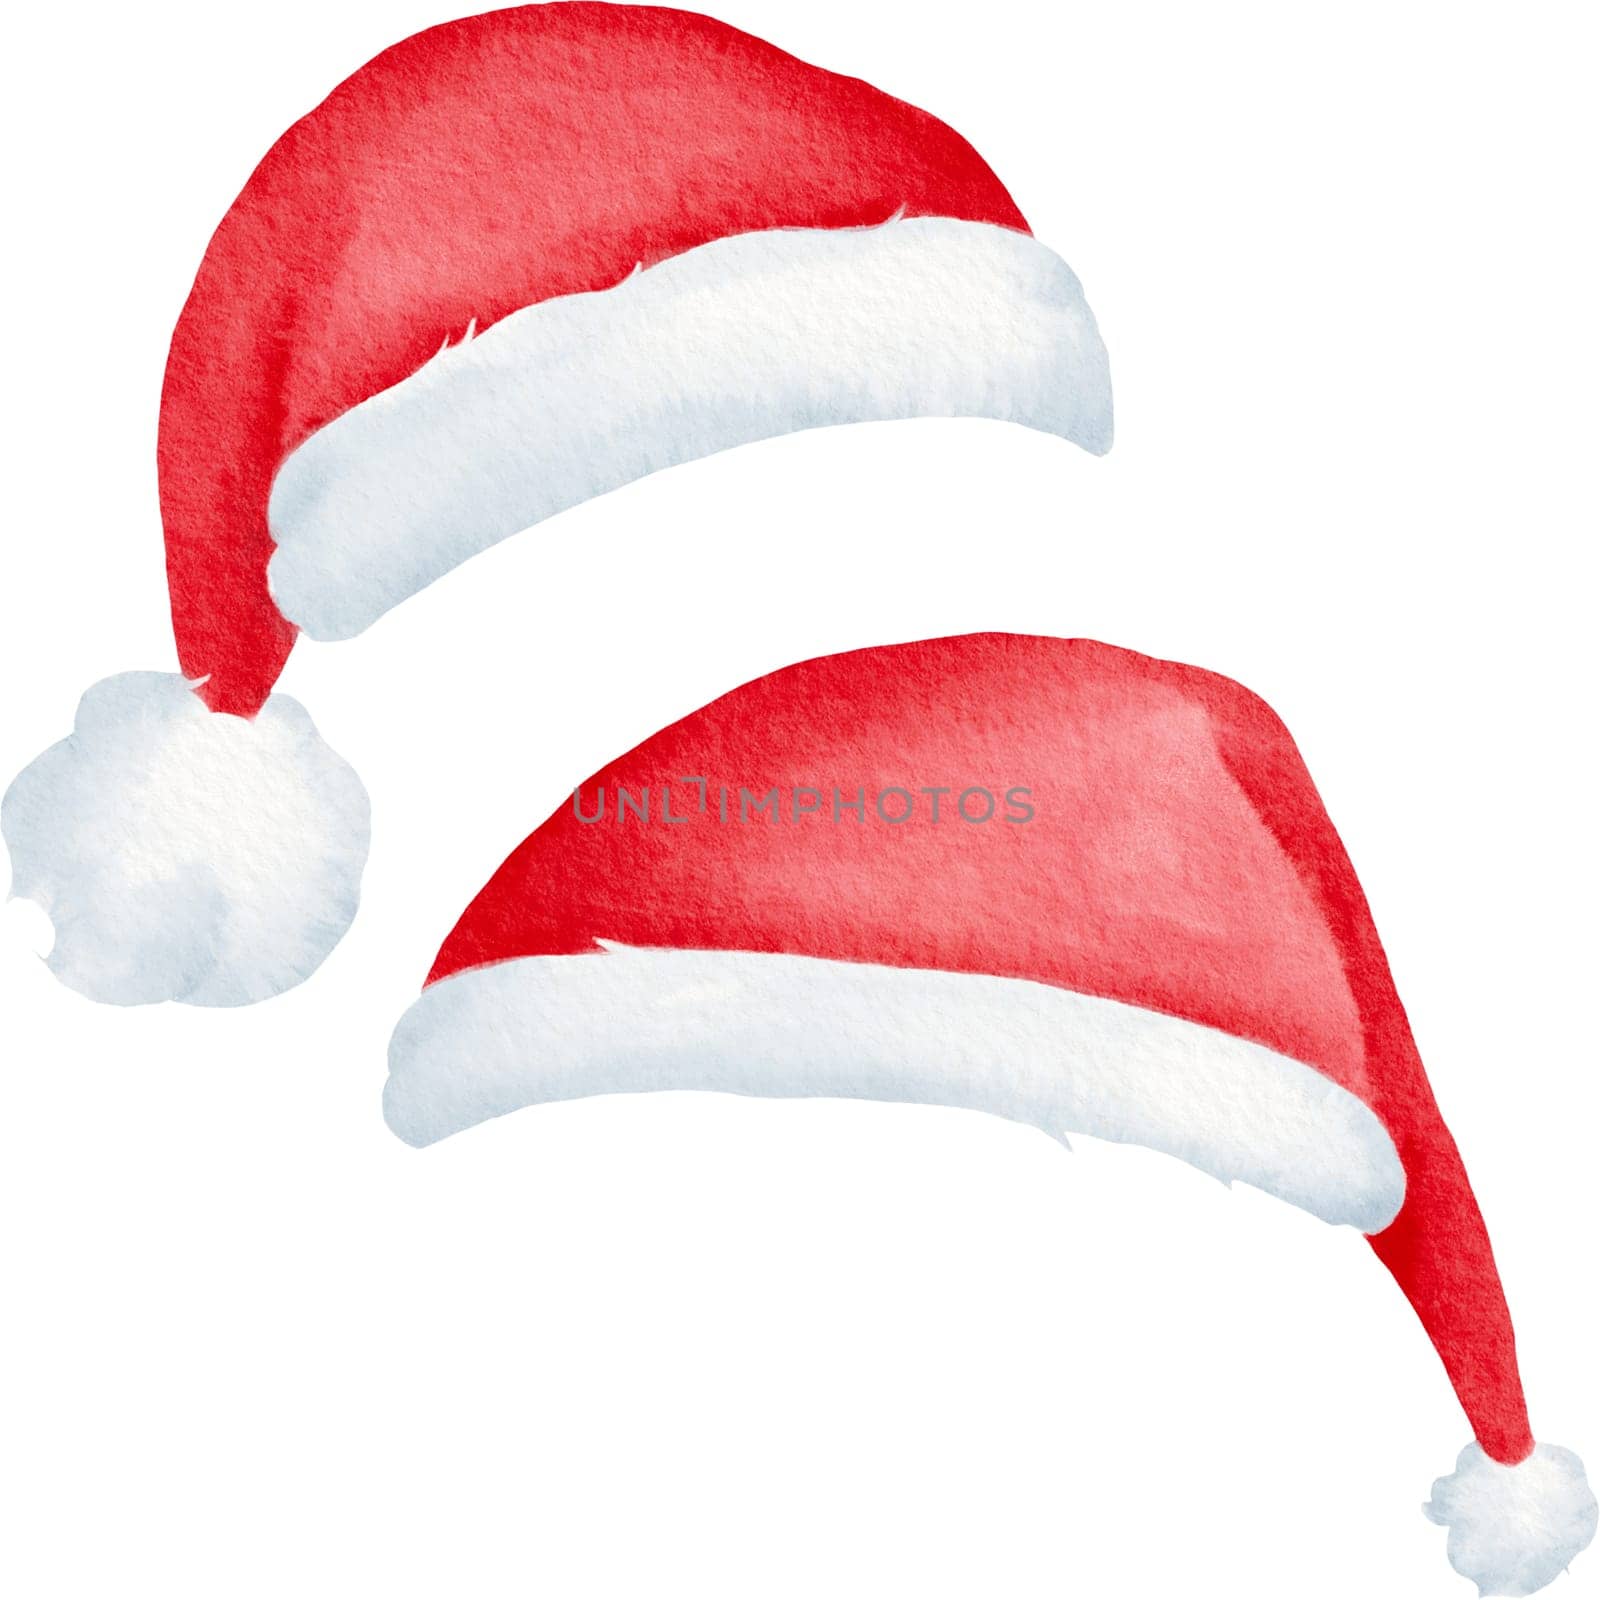 Santa Claus hat. Winter clothes. Christmas red hat in new year holiday cartoon design. for greeting card, postcards party invitations, posters, greetings, websites, stories, notebooks, textbooks..